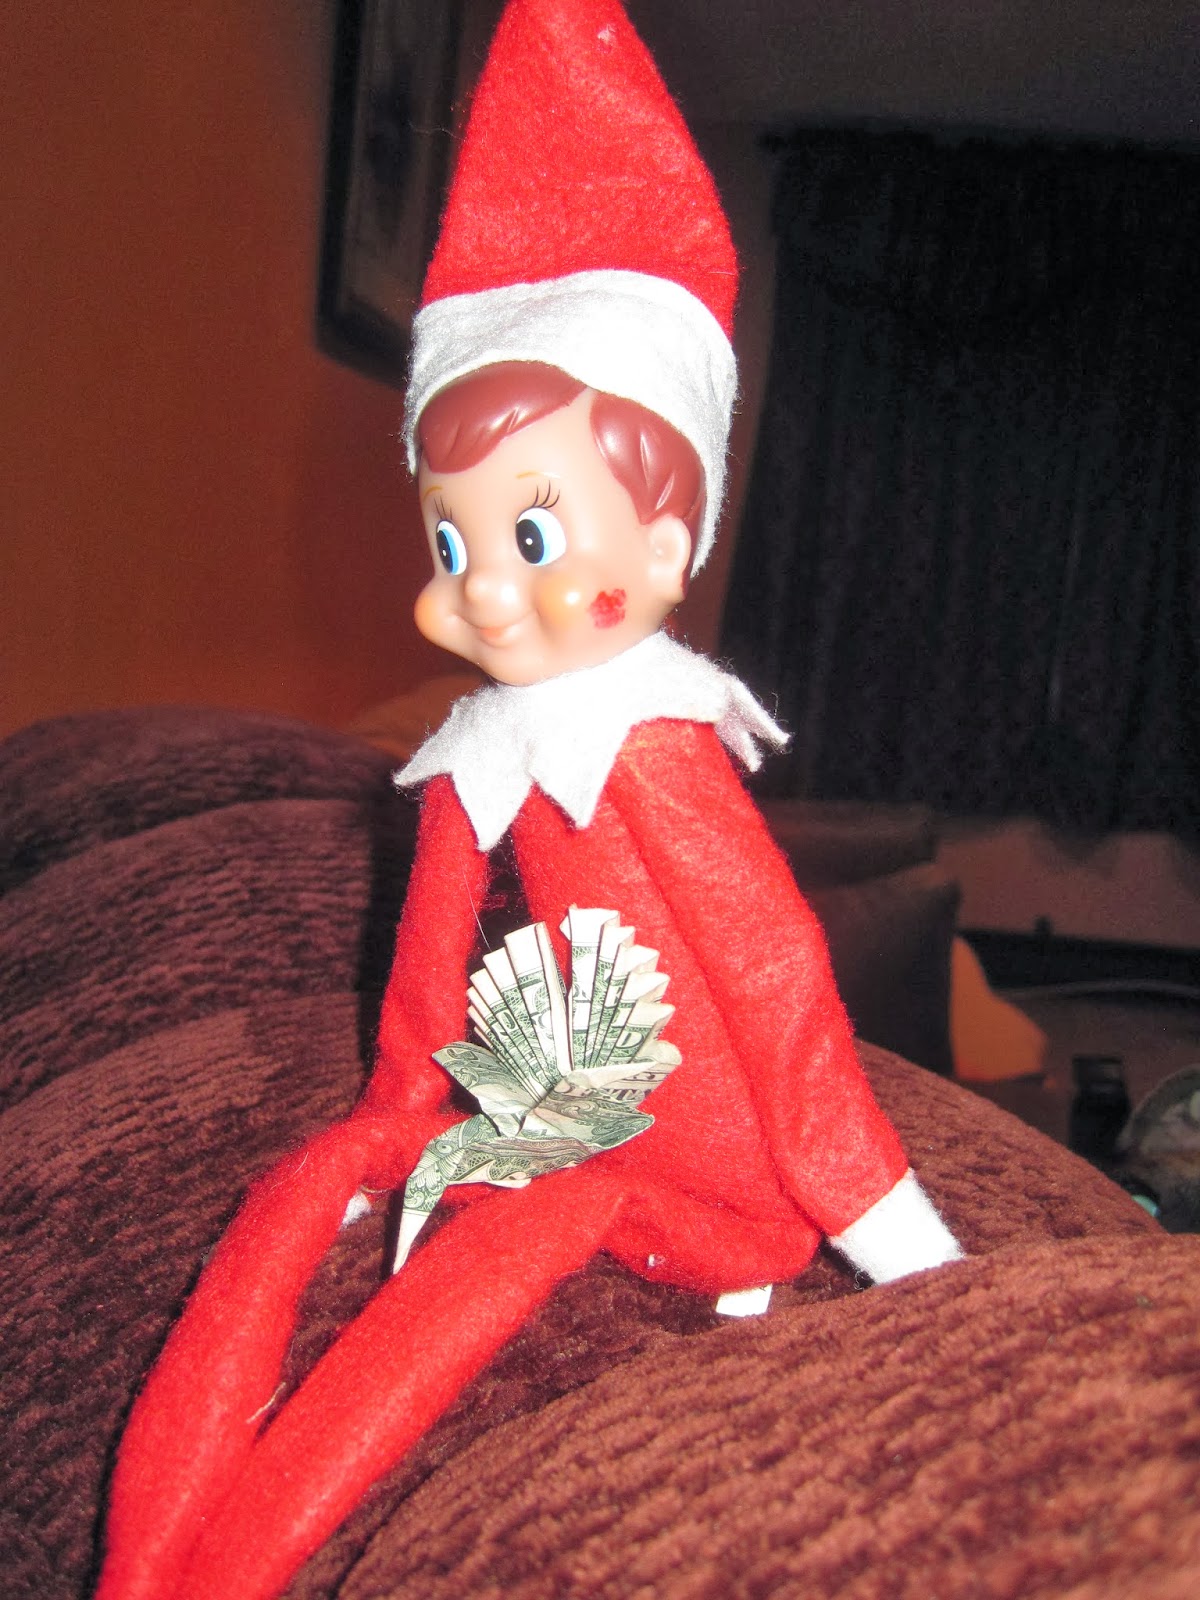 Follow The Nielsen Family - Small Town USA: Elf on the Shelf 2013